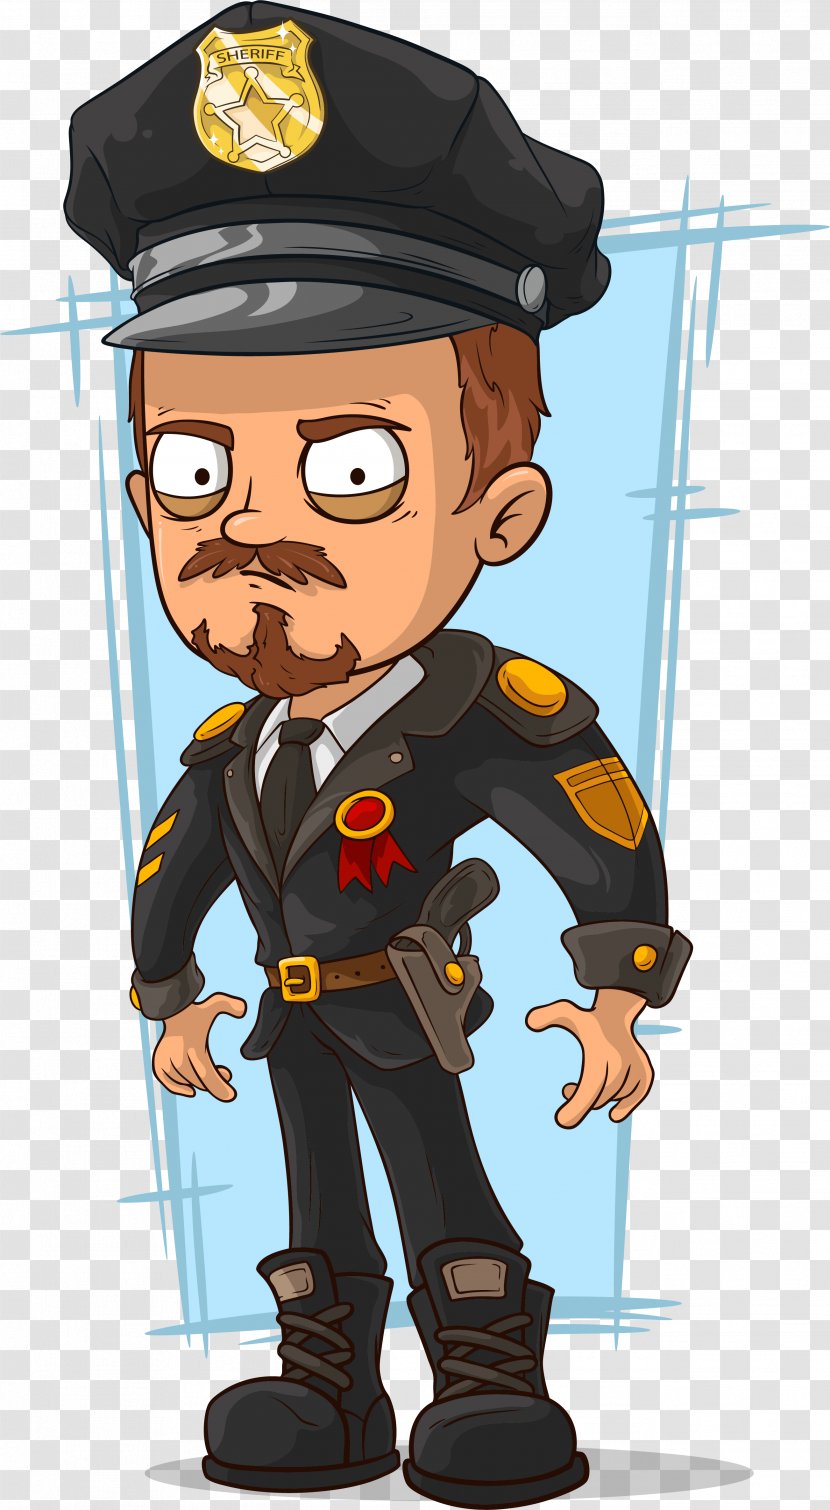 Police Officer Cartoon Stock Illustration - Hand Painted Transparent PNG